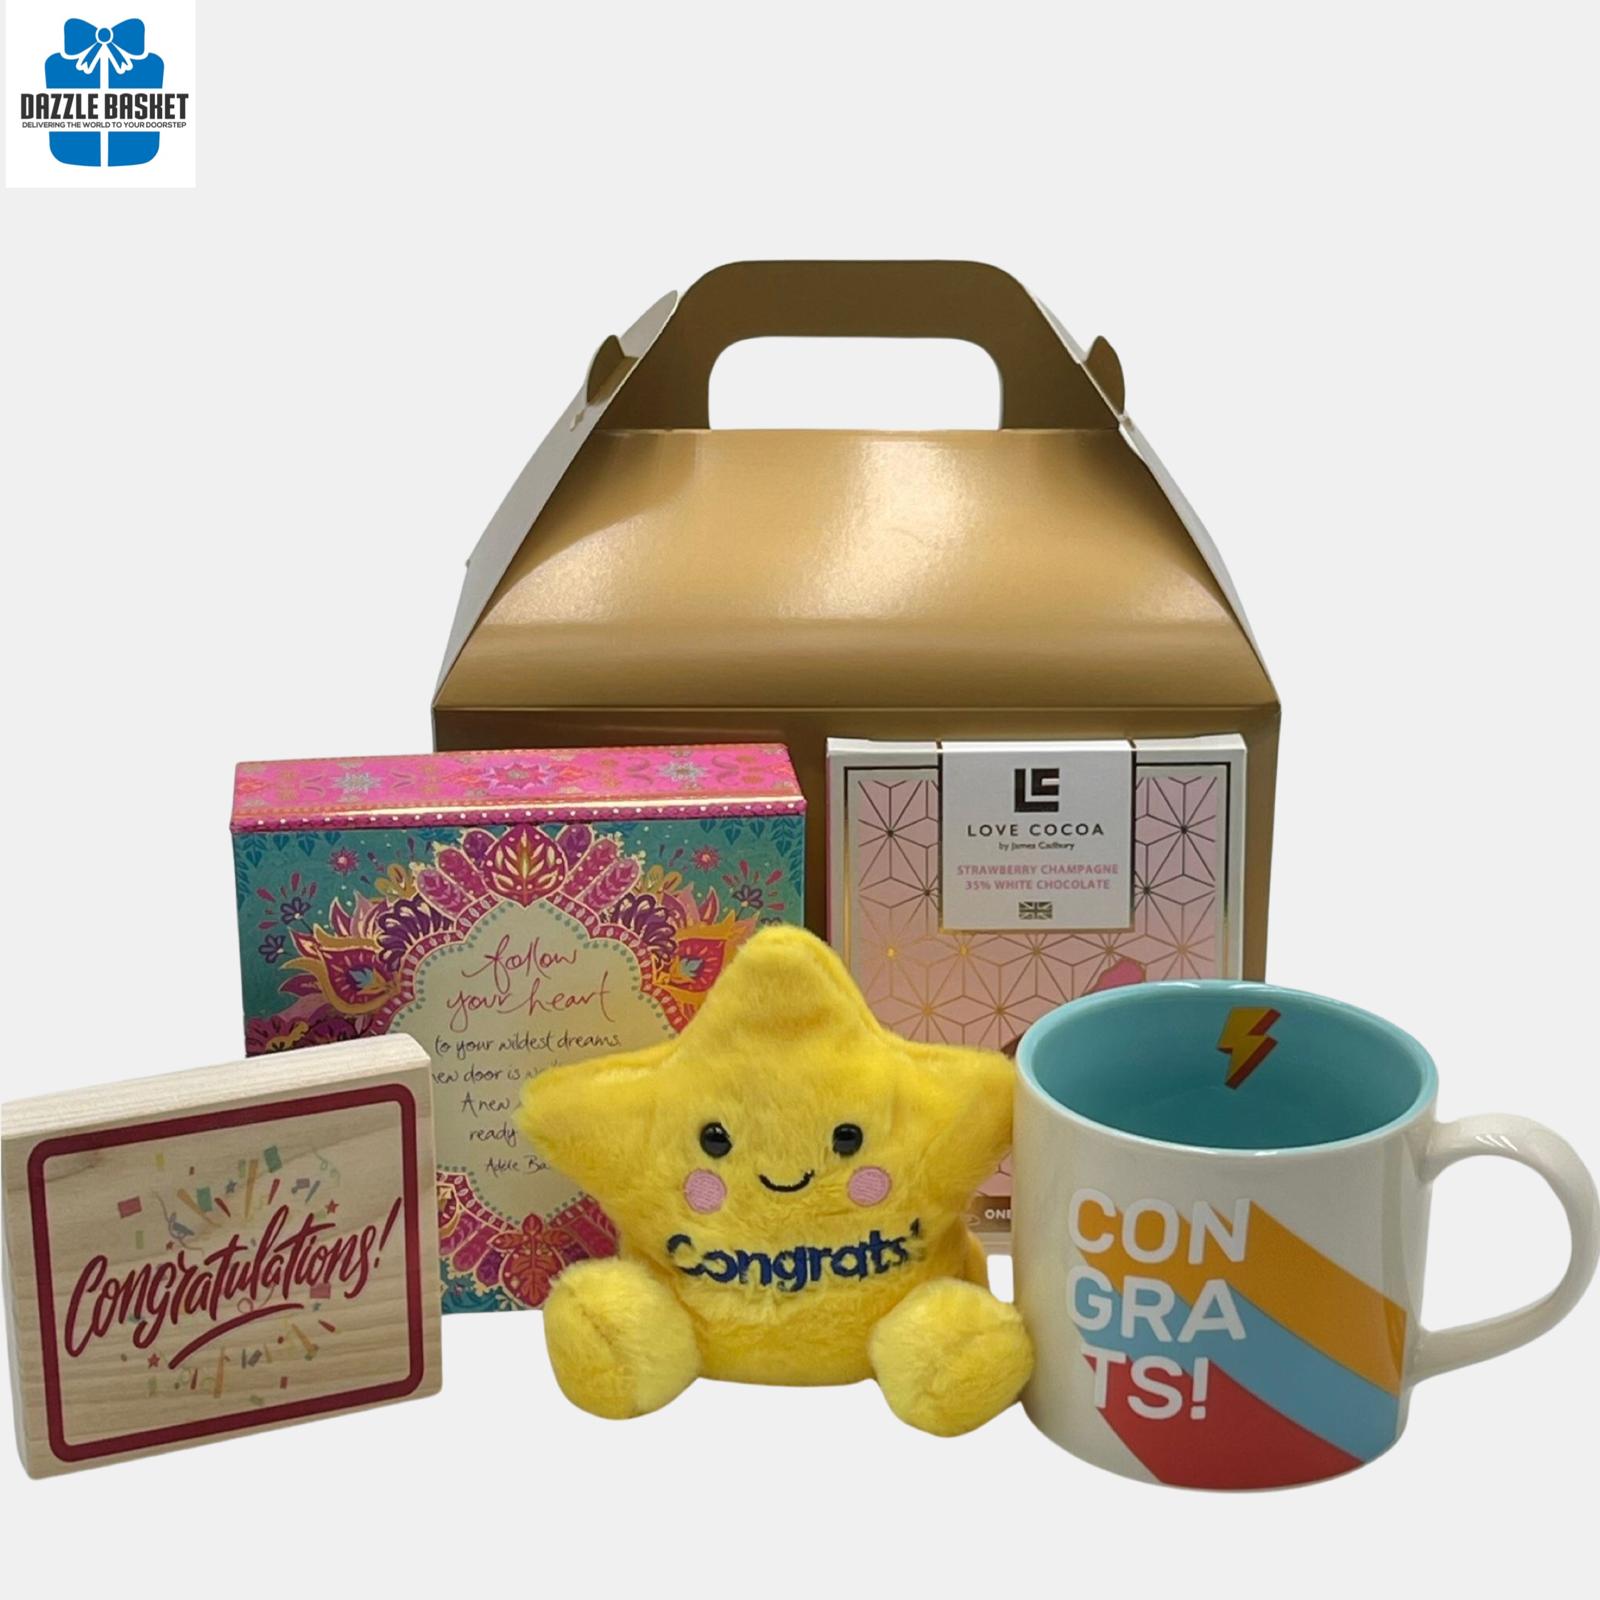 A Congratulations gift box that includes a Congratulations plaque, a Congratulations mug along with number of other products to make the recipient feel extra special.